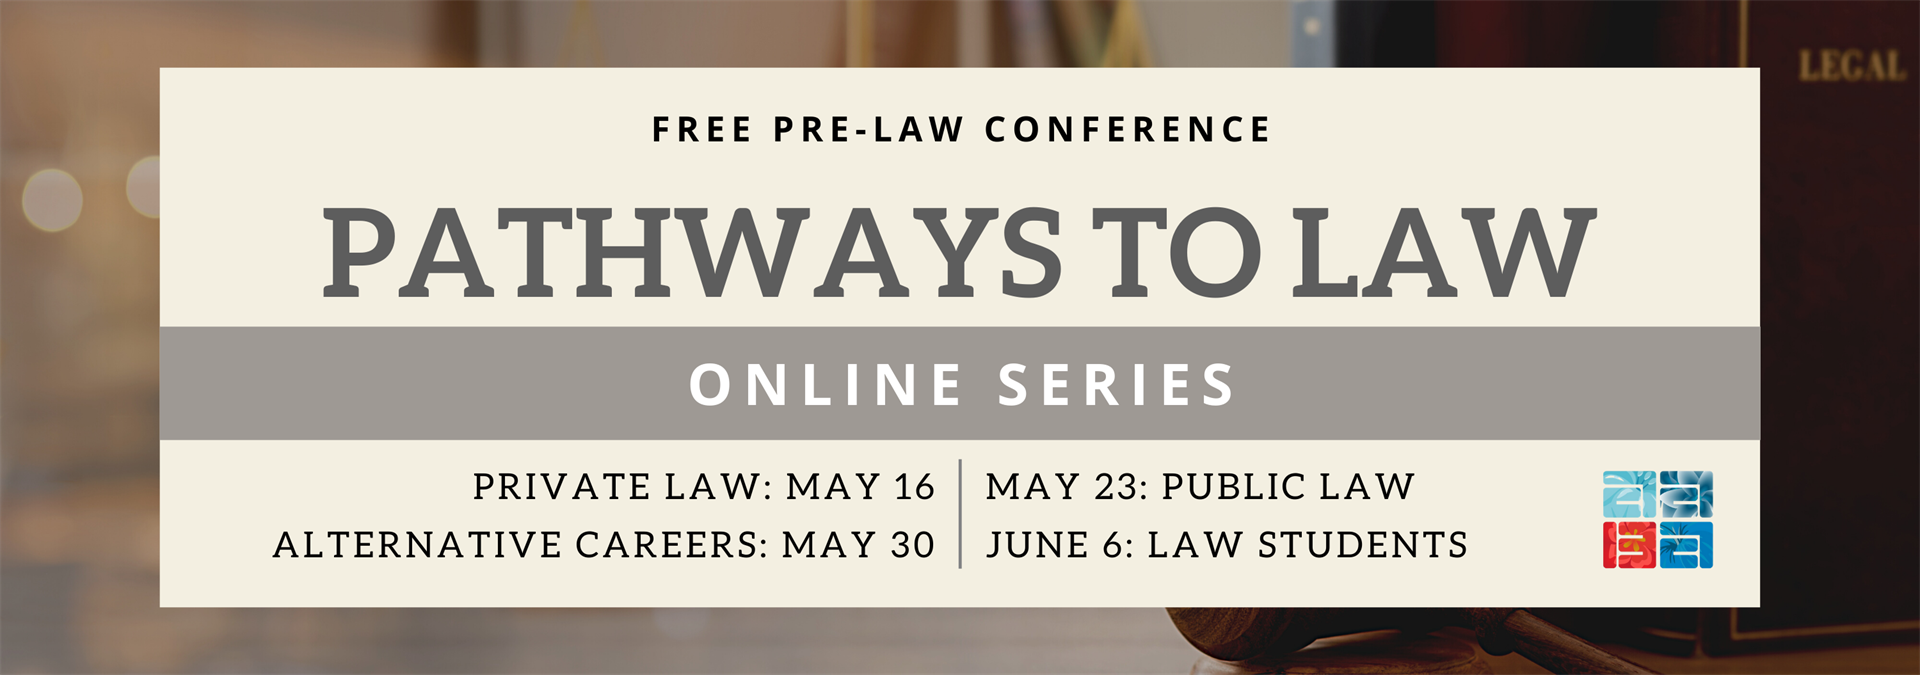 Pathways to Law Conference